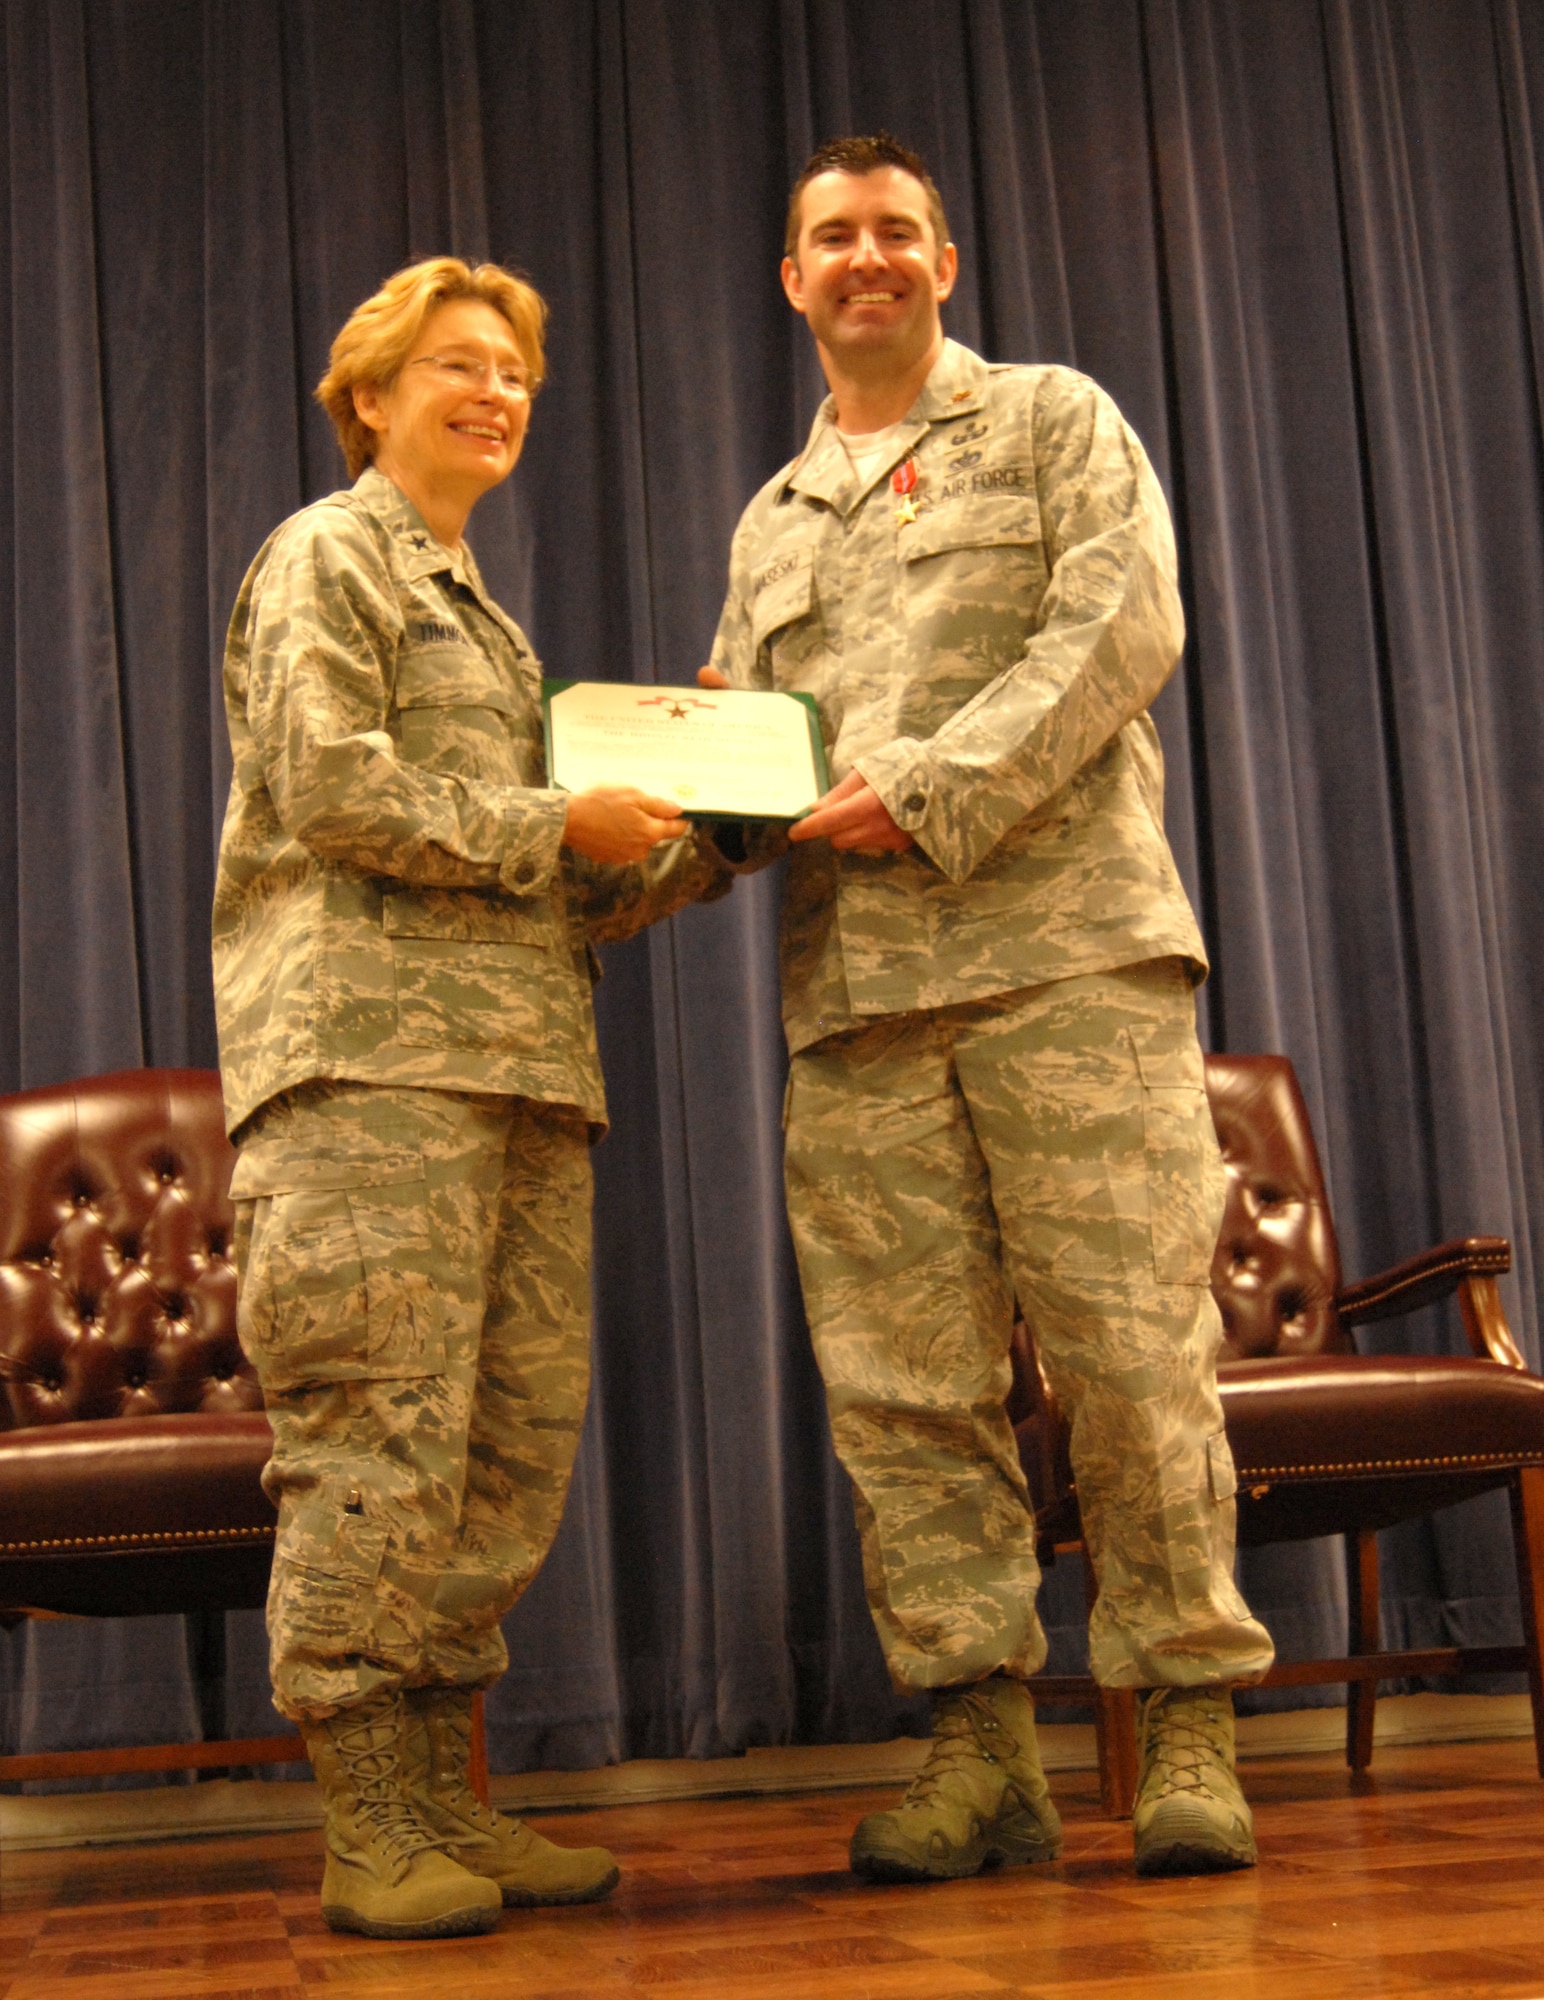 Air Force Brig. Gen. Carol Timmons, assistant adjutant general for air, Delaware National Guard, with Air Force Maj. Devin Tomaseski, base civil engineer, 166th Civil Engineer Squadron, 166th Airlift Wing, Delaware Air National Guard, after Tomaseski received the Bronze Star medal at a ceremony held at 166th AW HQ, New Castle ANG Base, New Castle, Del. on June 20, 2014. Tomaseski distinguished himself by exceptionally meritorious service while deployed in support of Operation Enduring Freedom in Afghanistan from 2011 to 2012. This is the third Bronze Star medal awarded to Tomaseski.  (U.S. Air National Guard photo by Tech. Sgt. Benjamin Matwey)